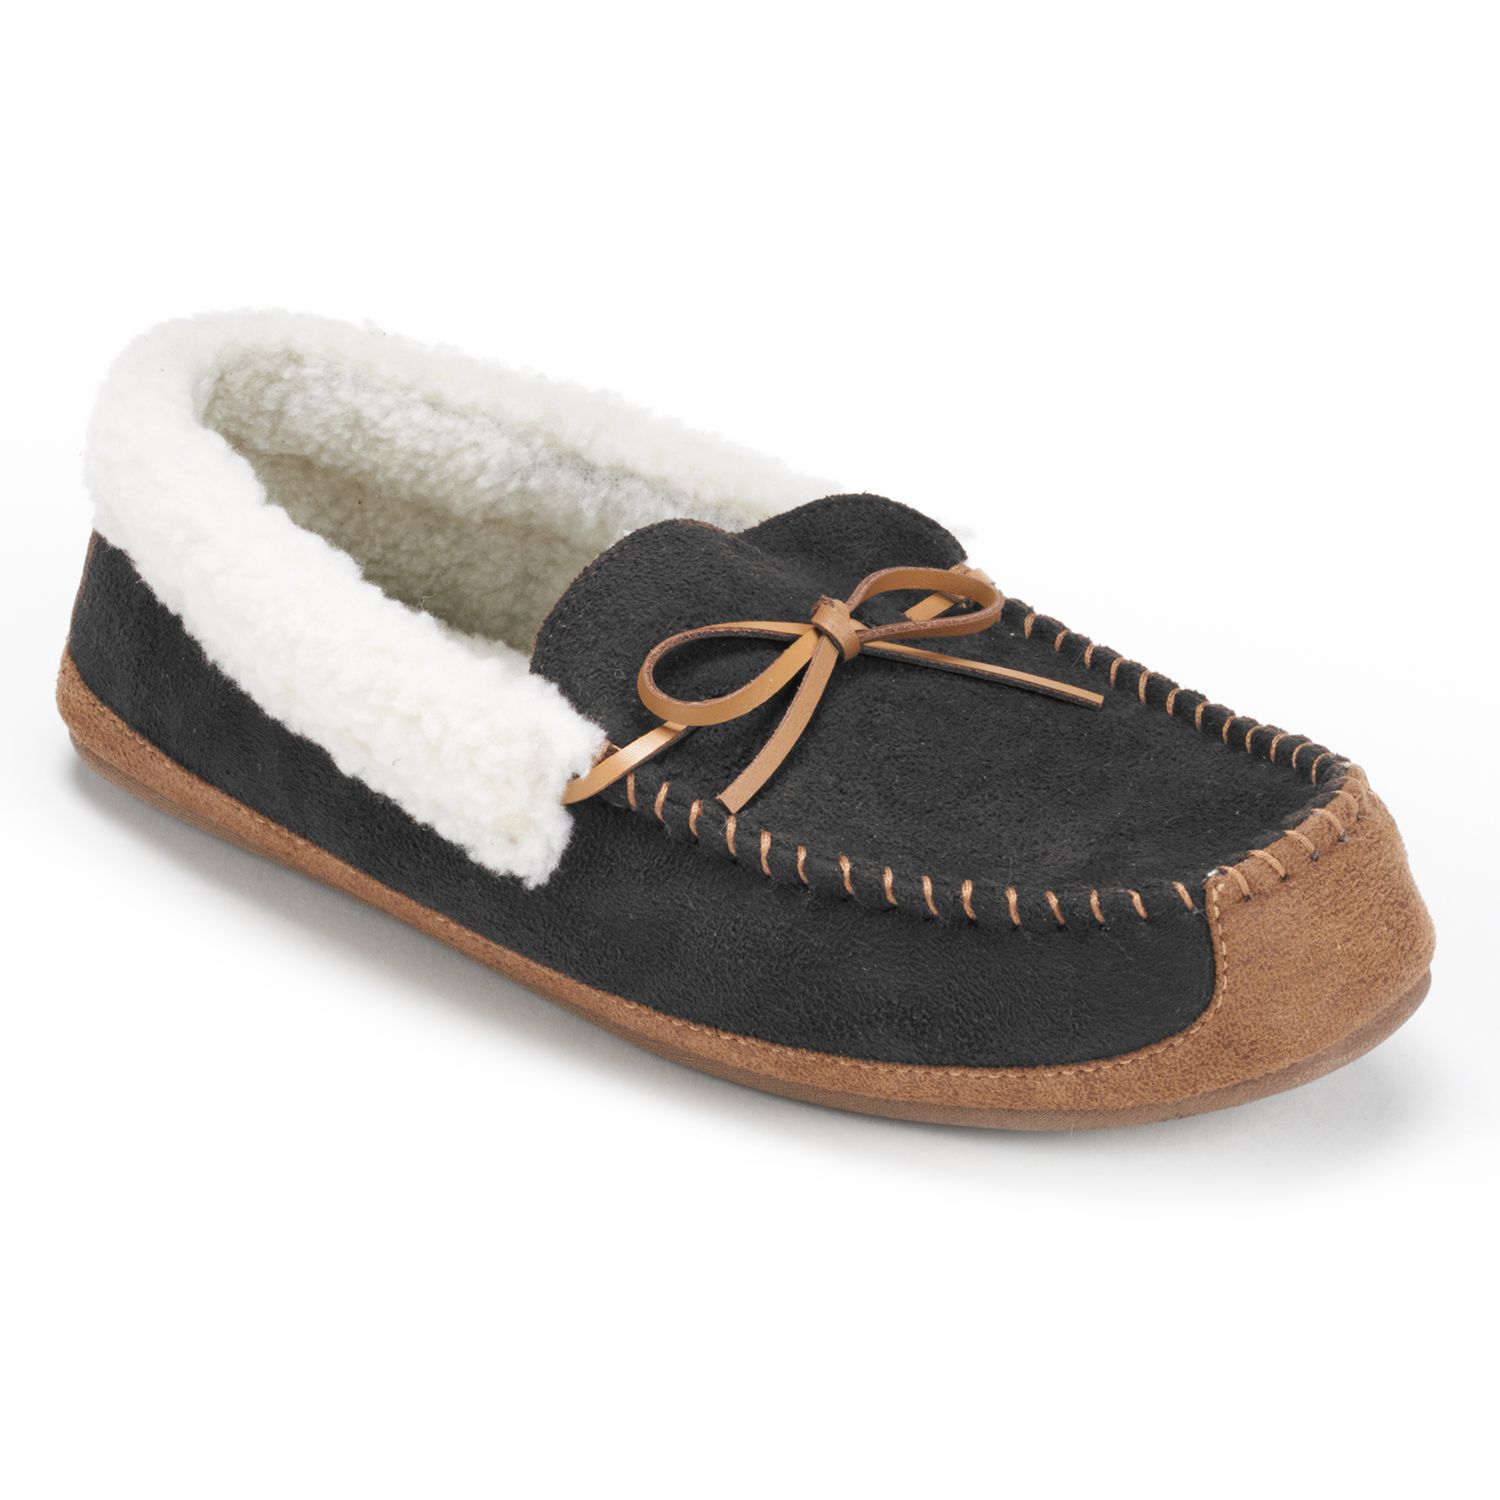 thinsulate moccasin slippers